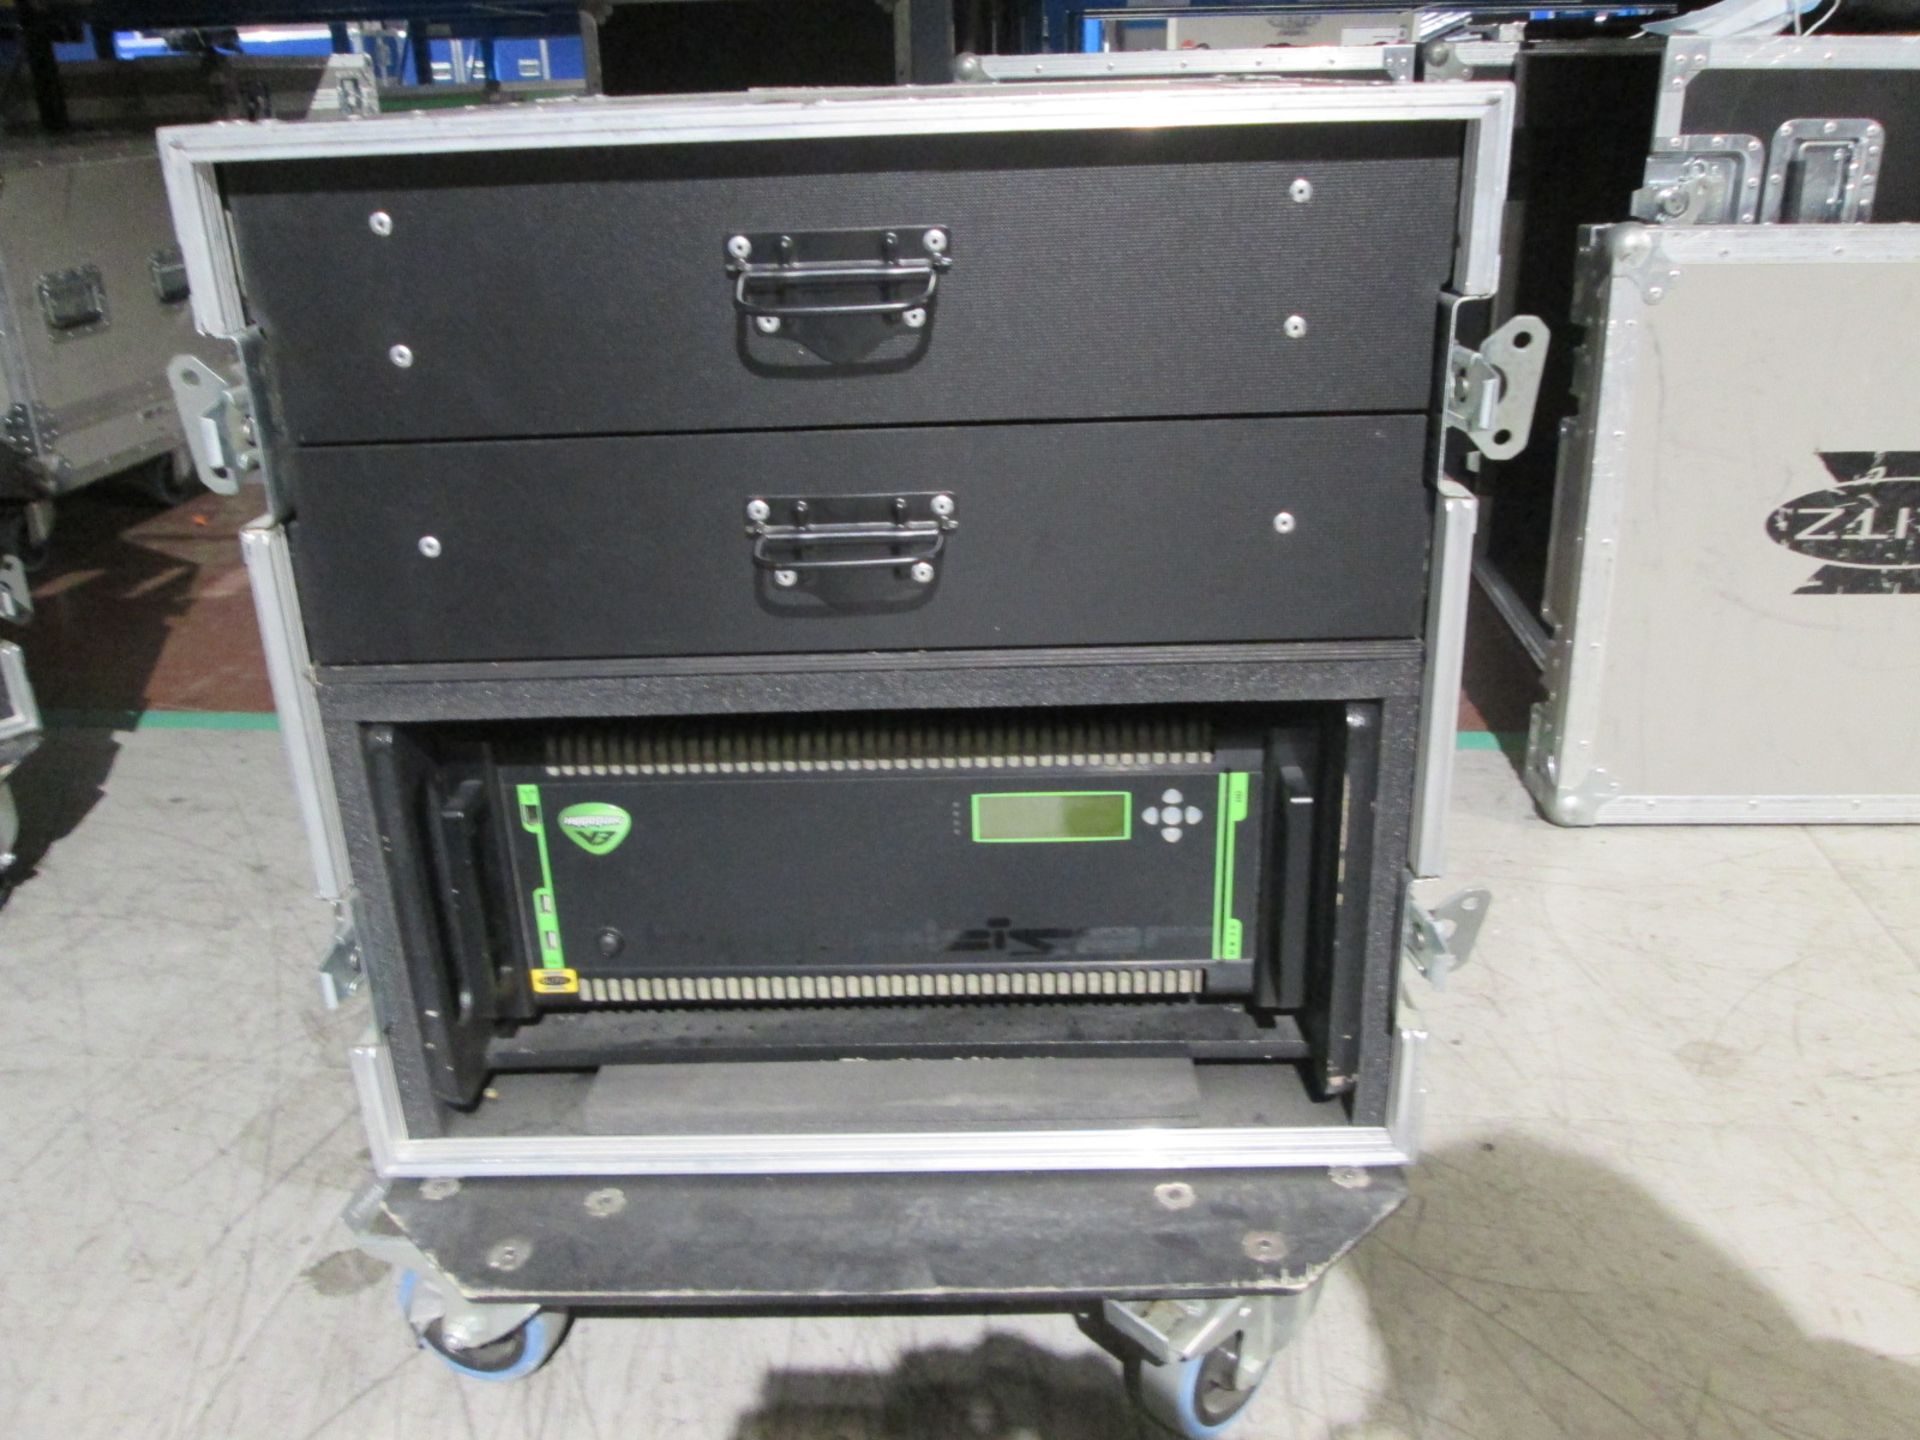 Green Hippo V5 Hippotiser Media Graphics Server with fader remote panel. S/N 2200. In flight case